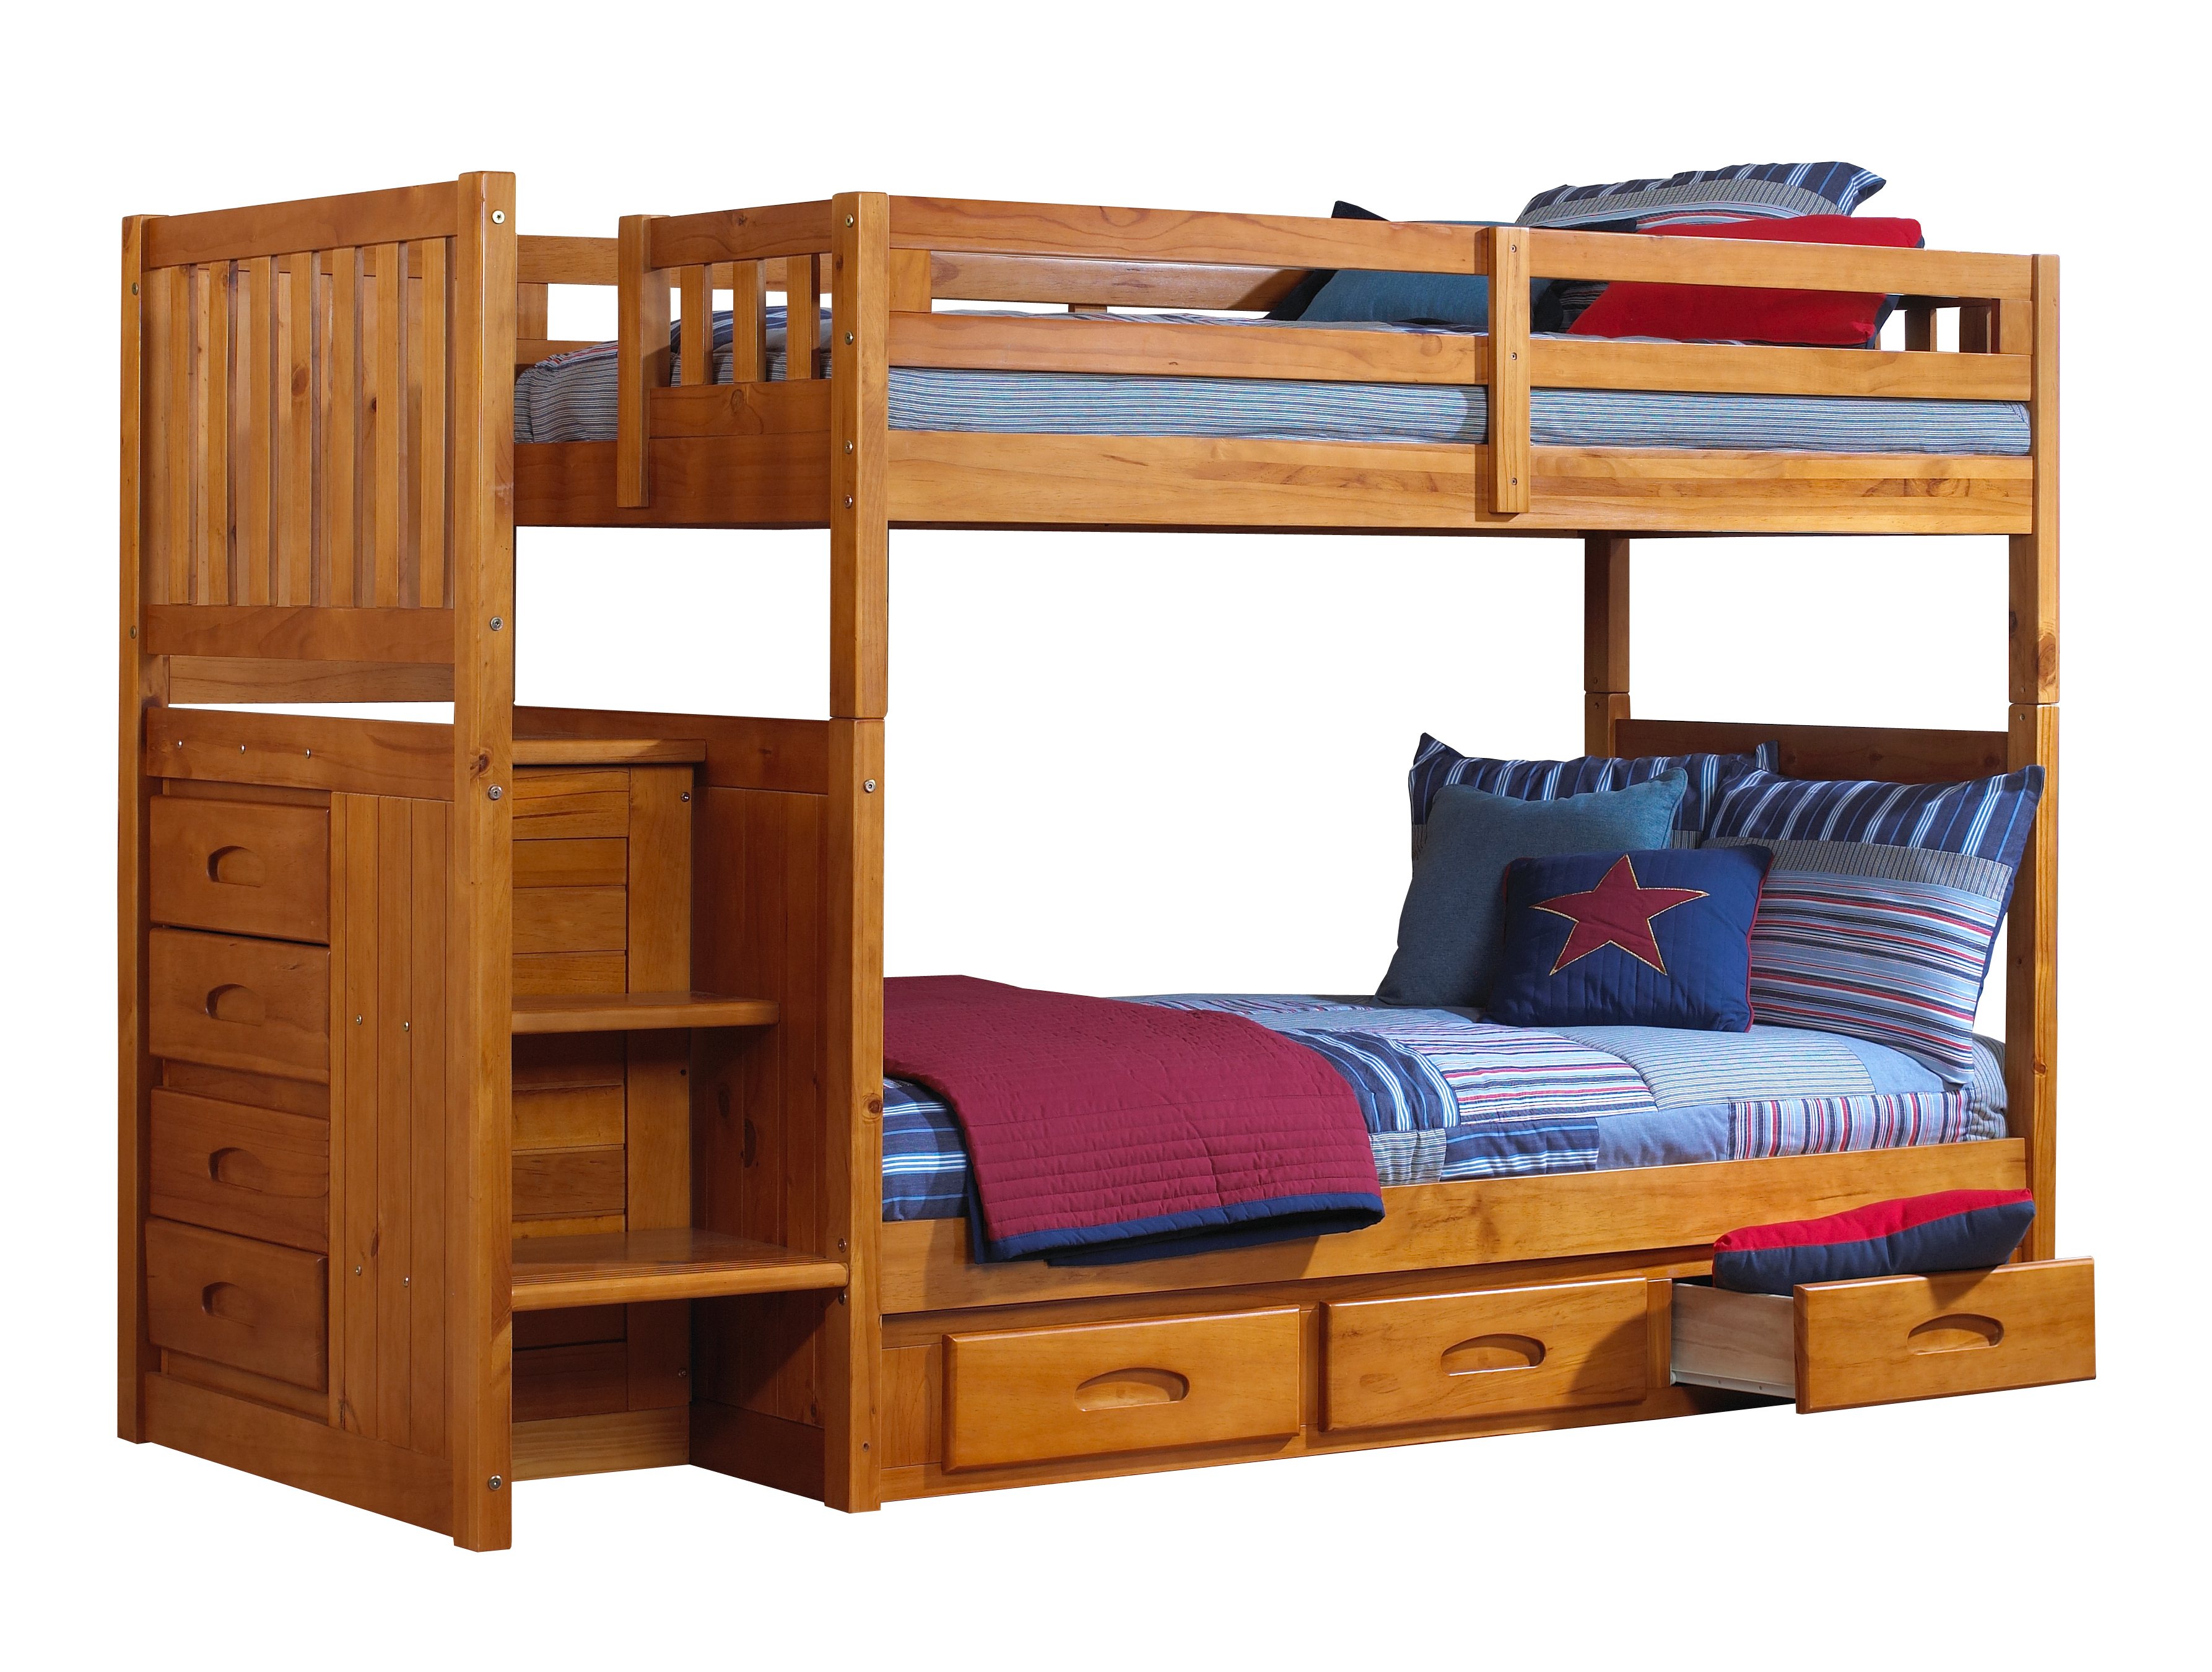 Twin Honey Mission Staircase Bunk Beds, Mission Style Twin Bed